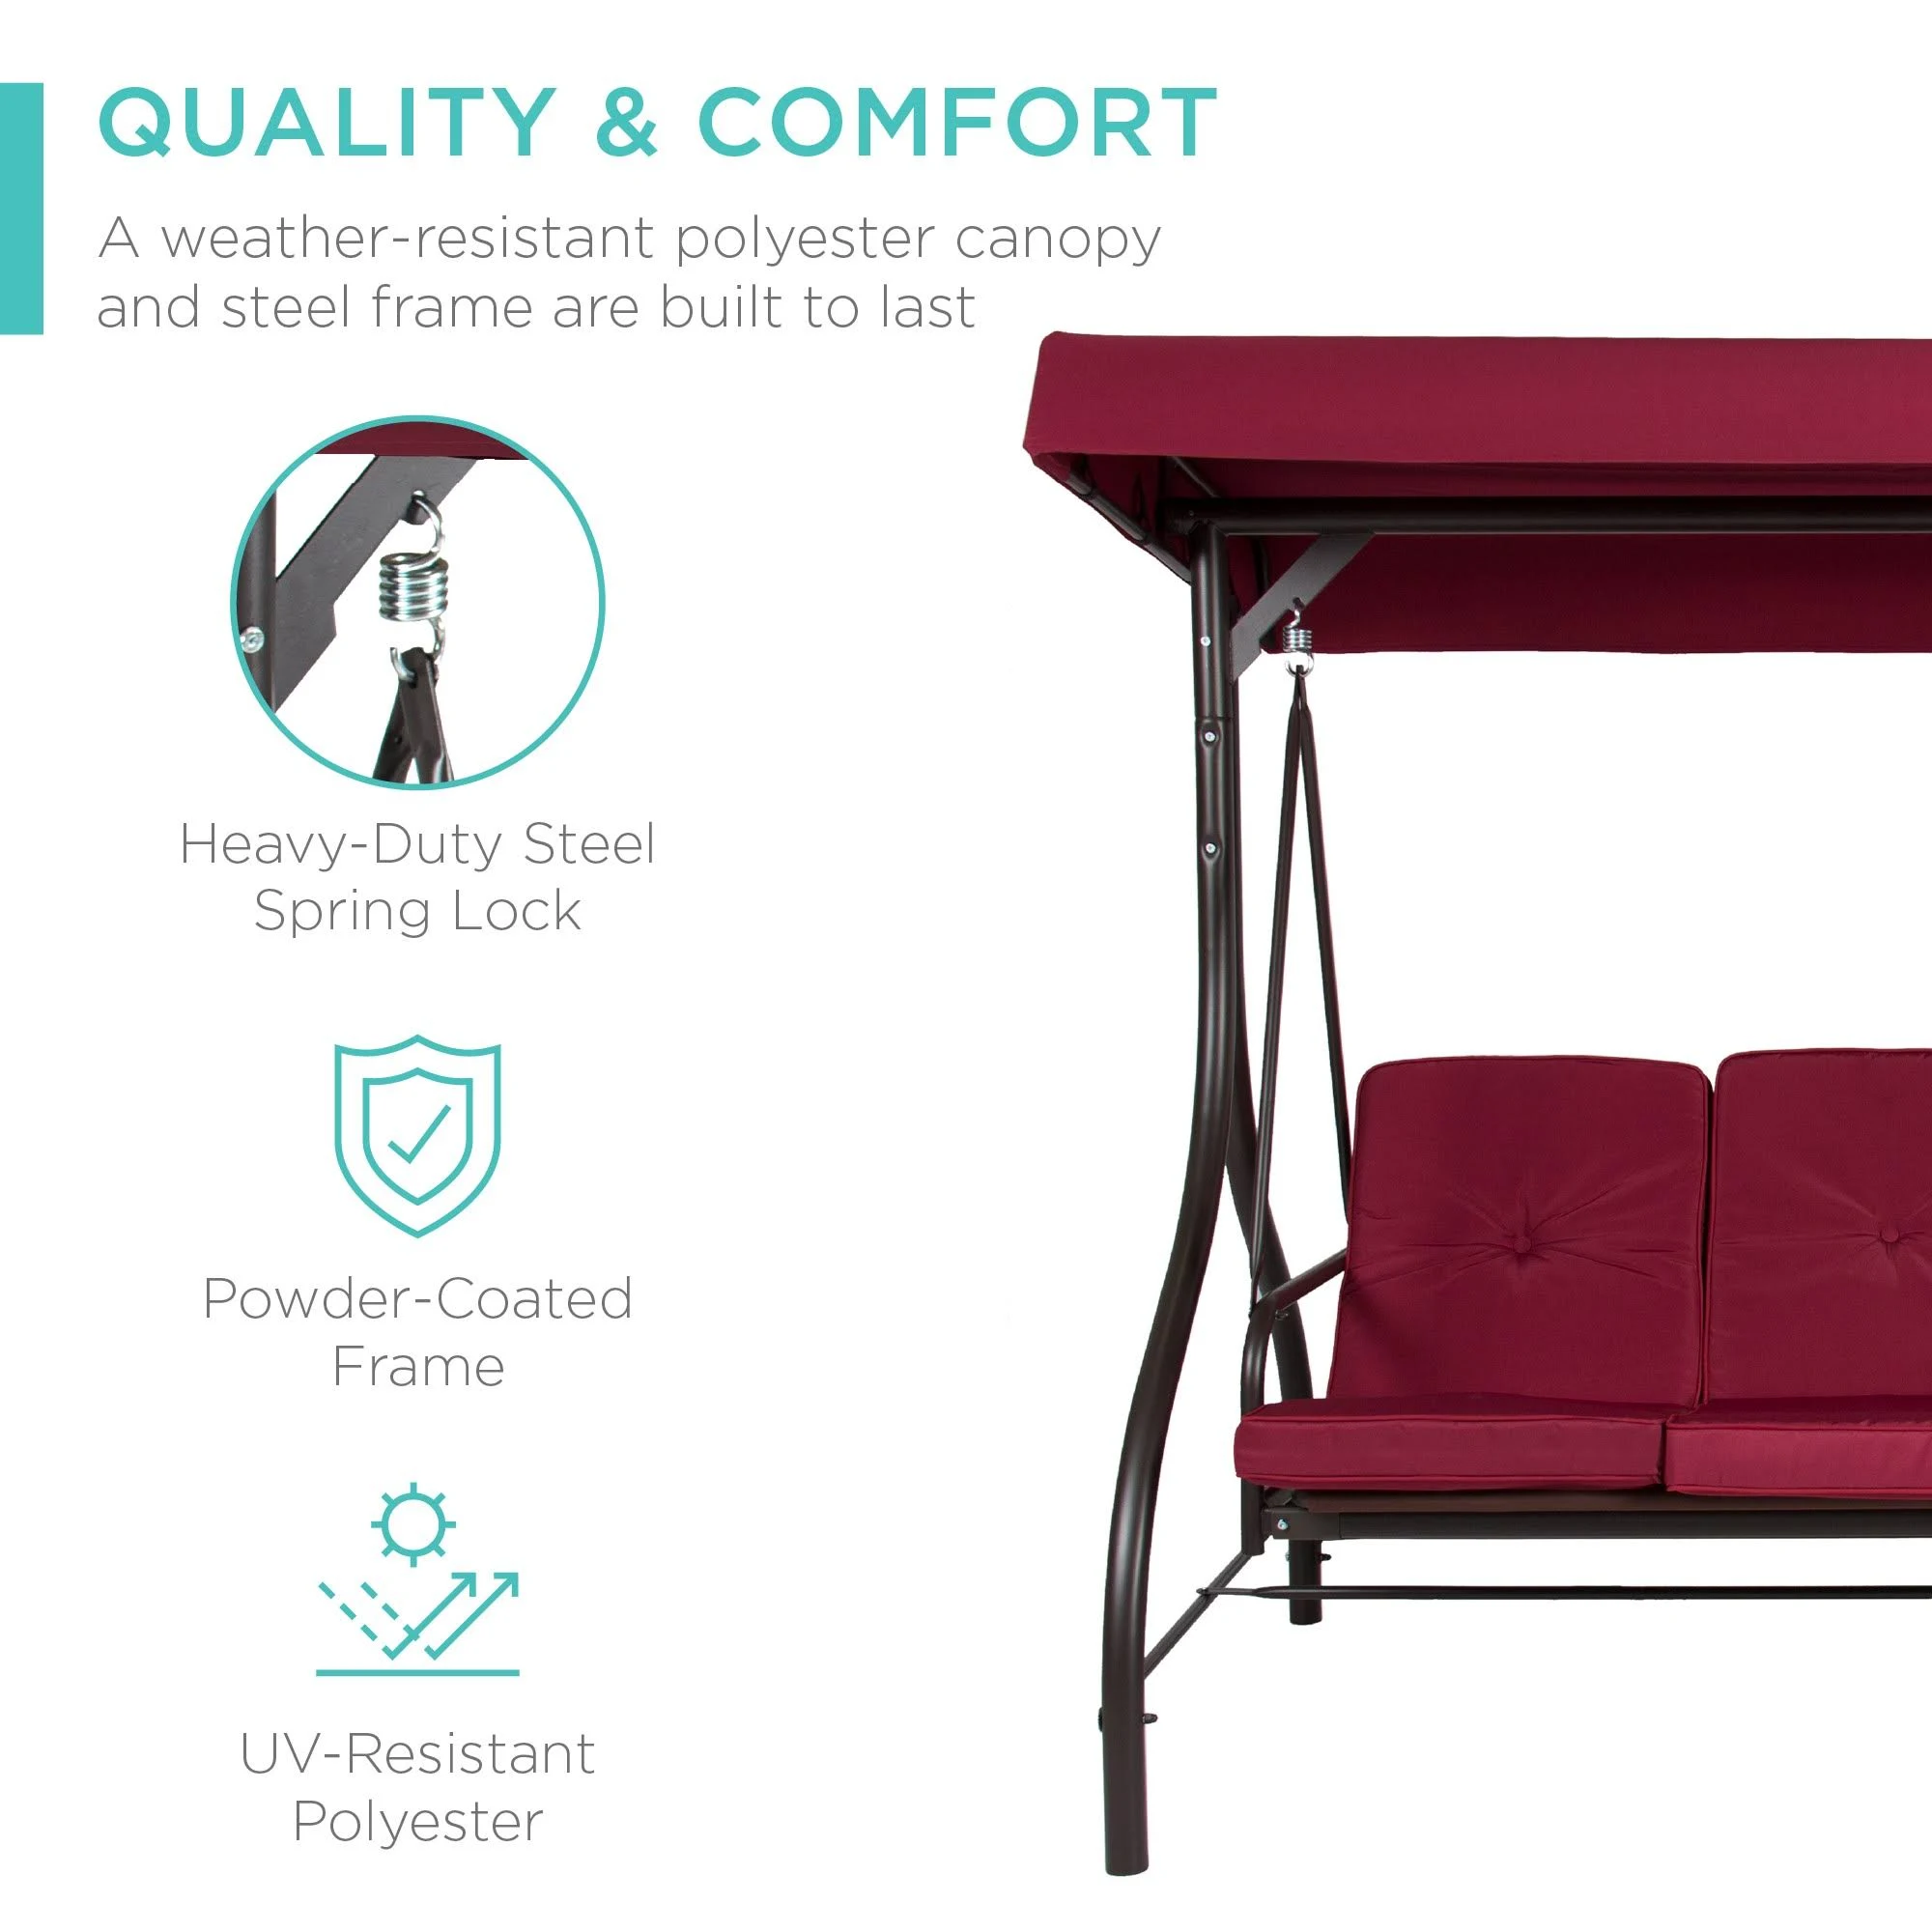 Best Choice Products 3-Seat Converting Outdoor Swing with Canopy, Burgundy